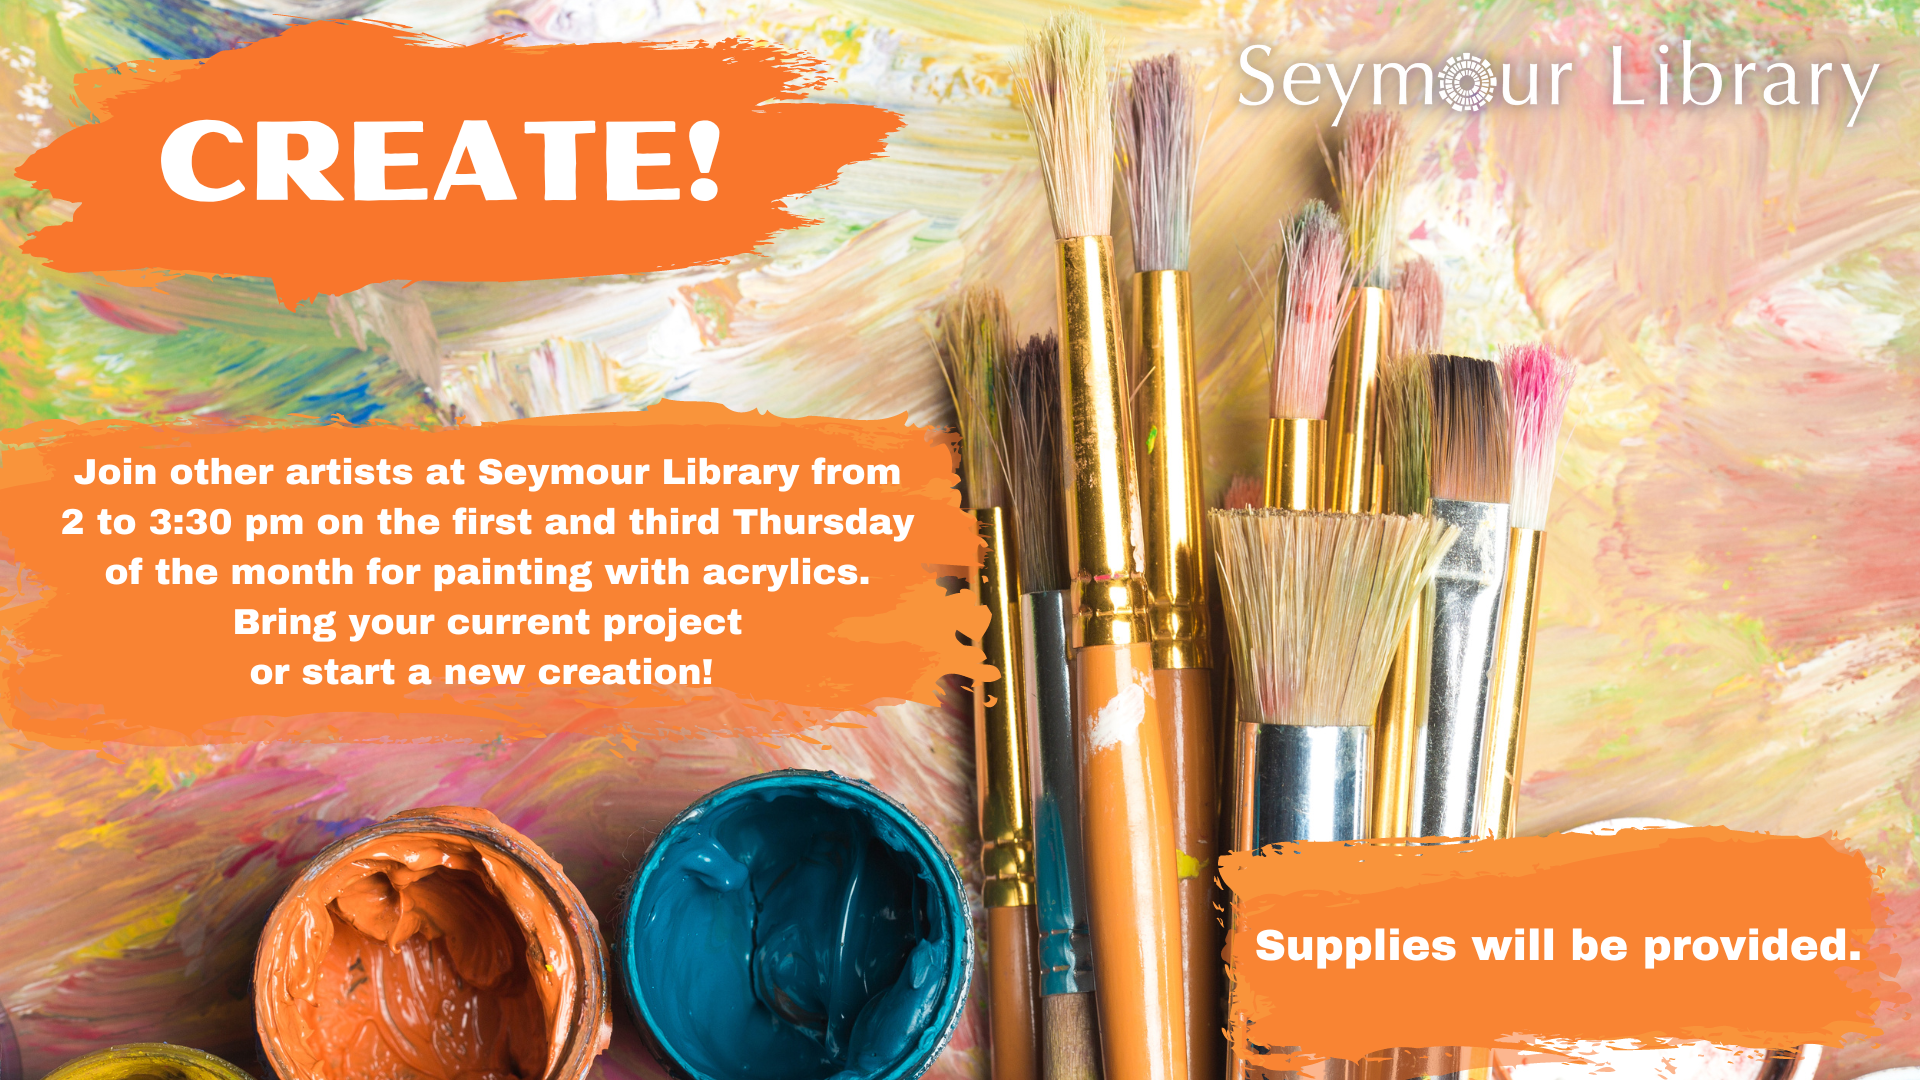 Create at Seymour Library -- featuring image of paint with paintbrushes.